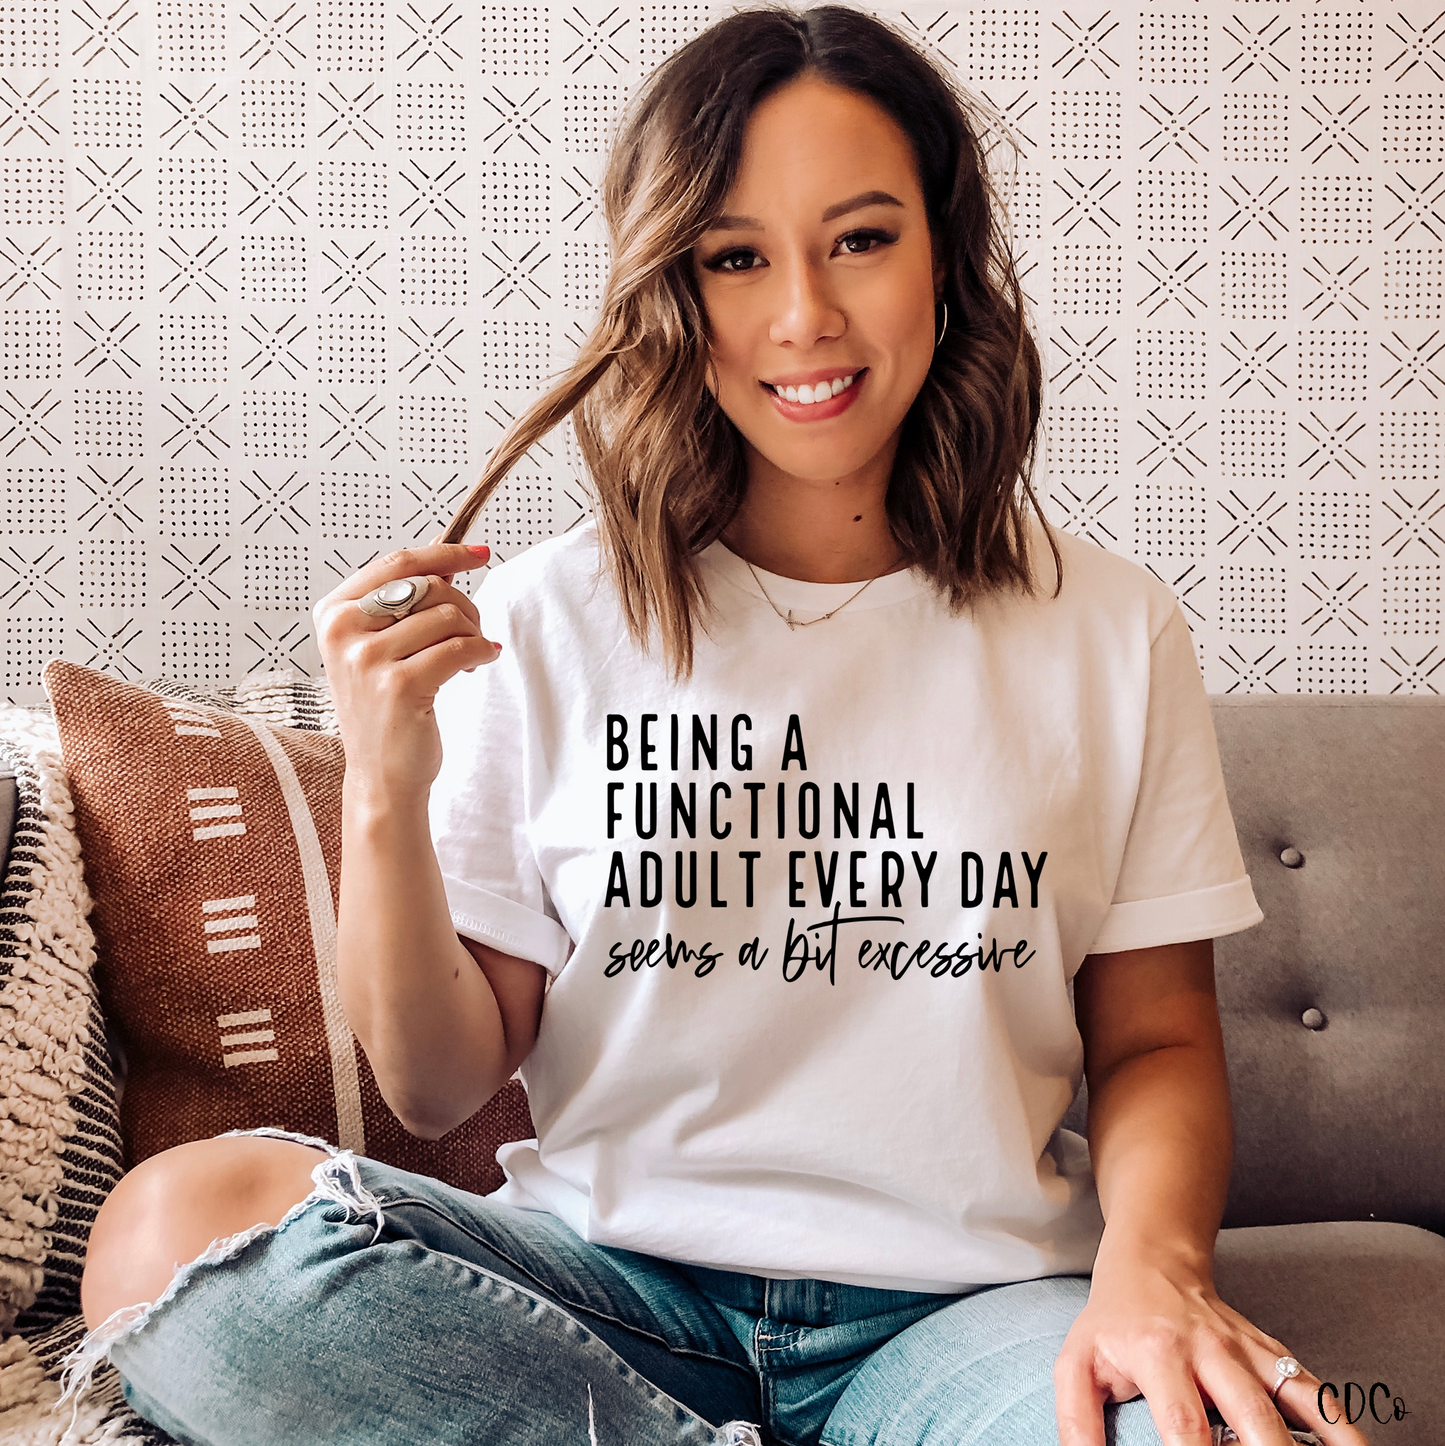 Being a Functional Adult Every Day Seems a Bit Excessive (325°)